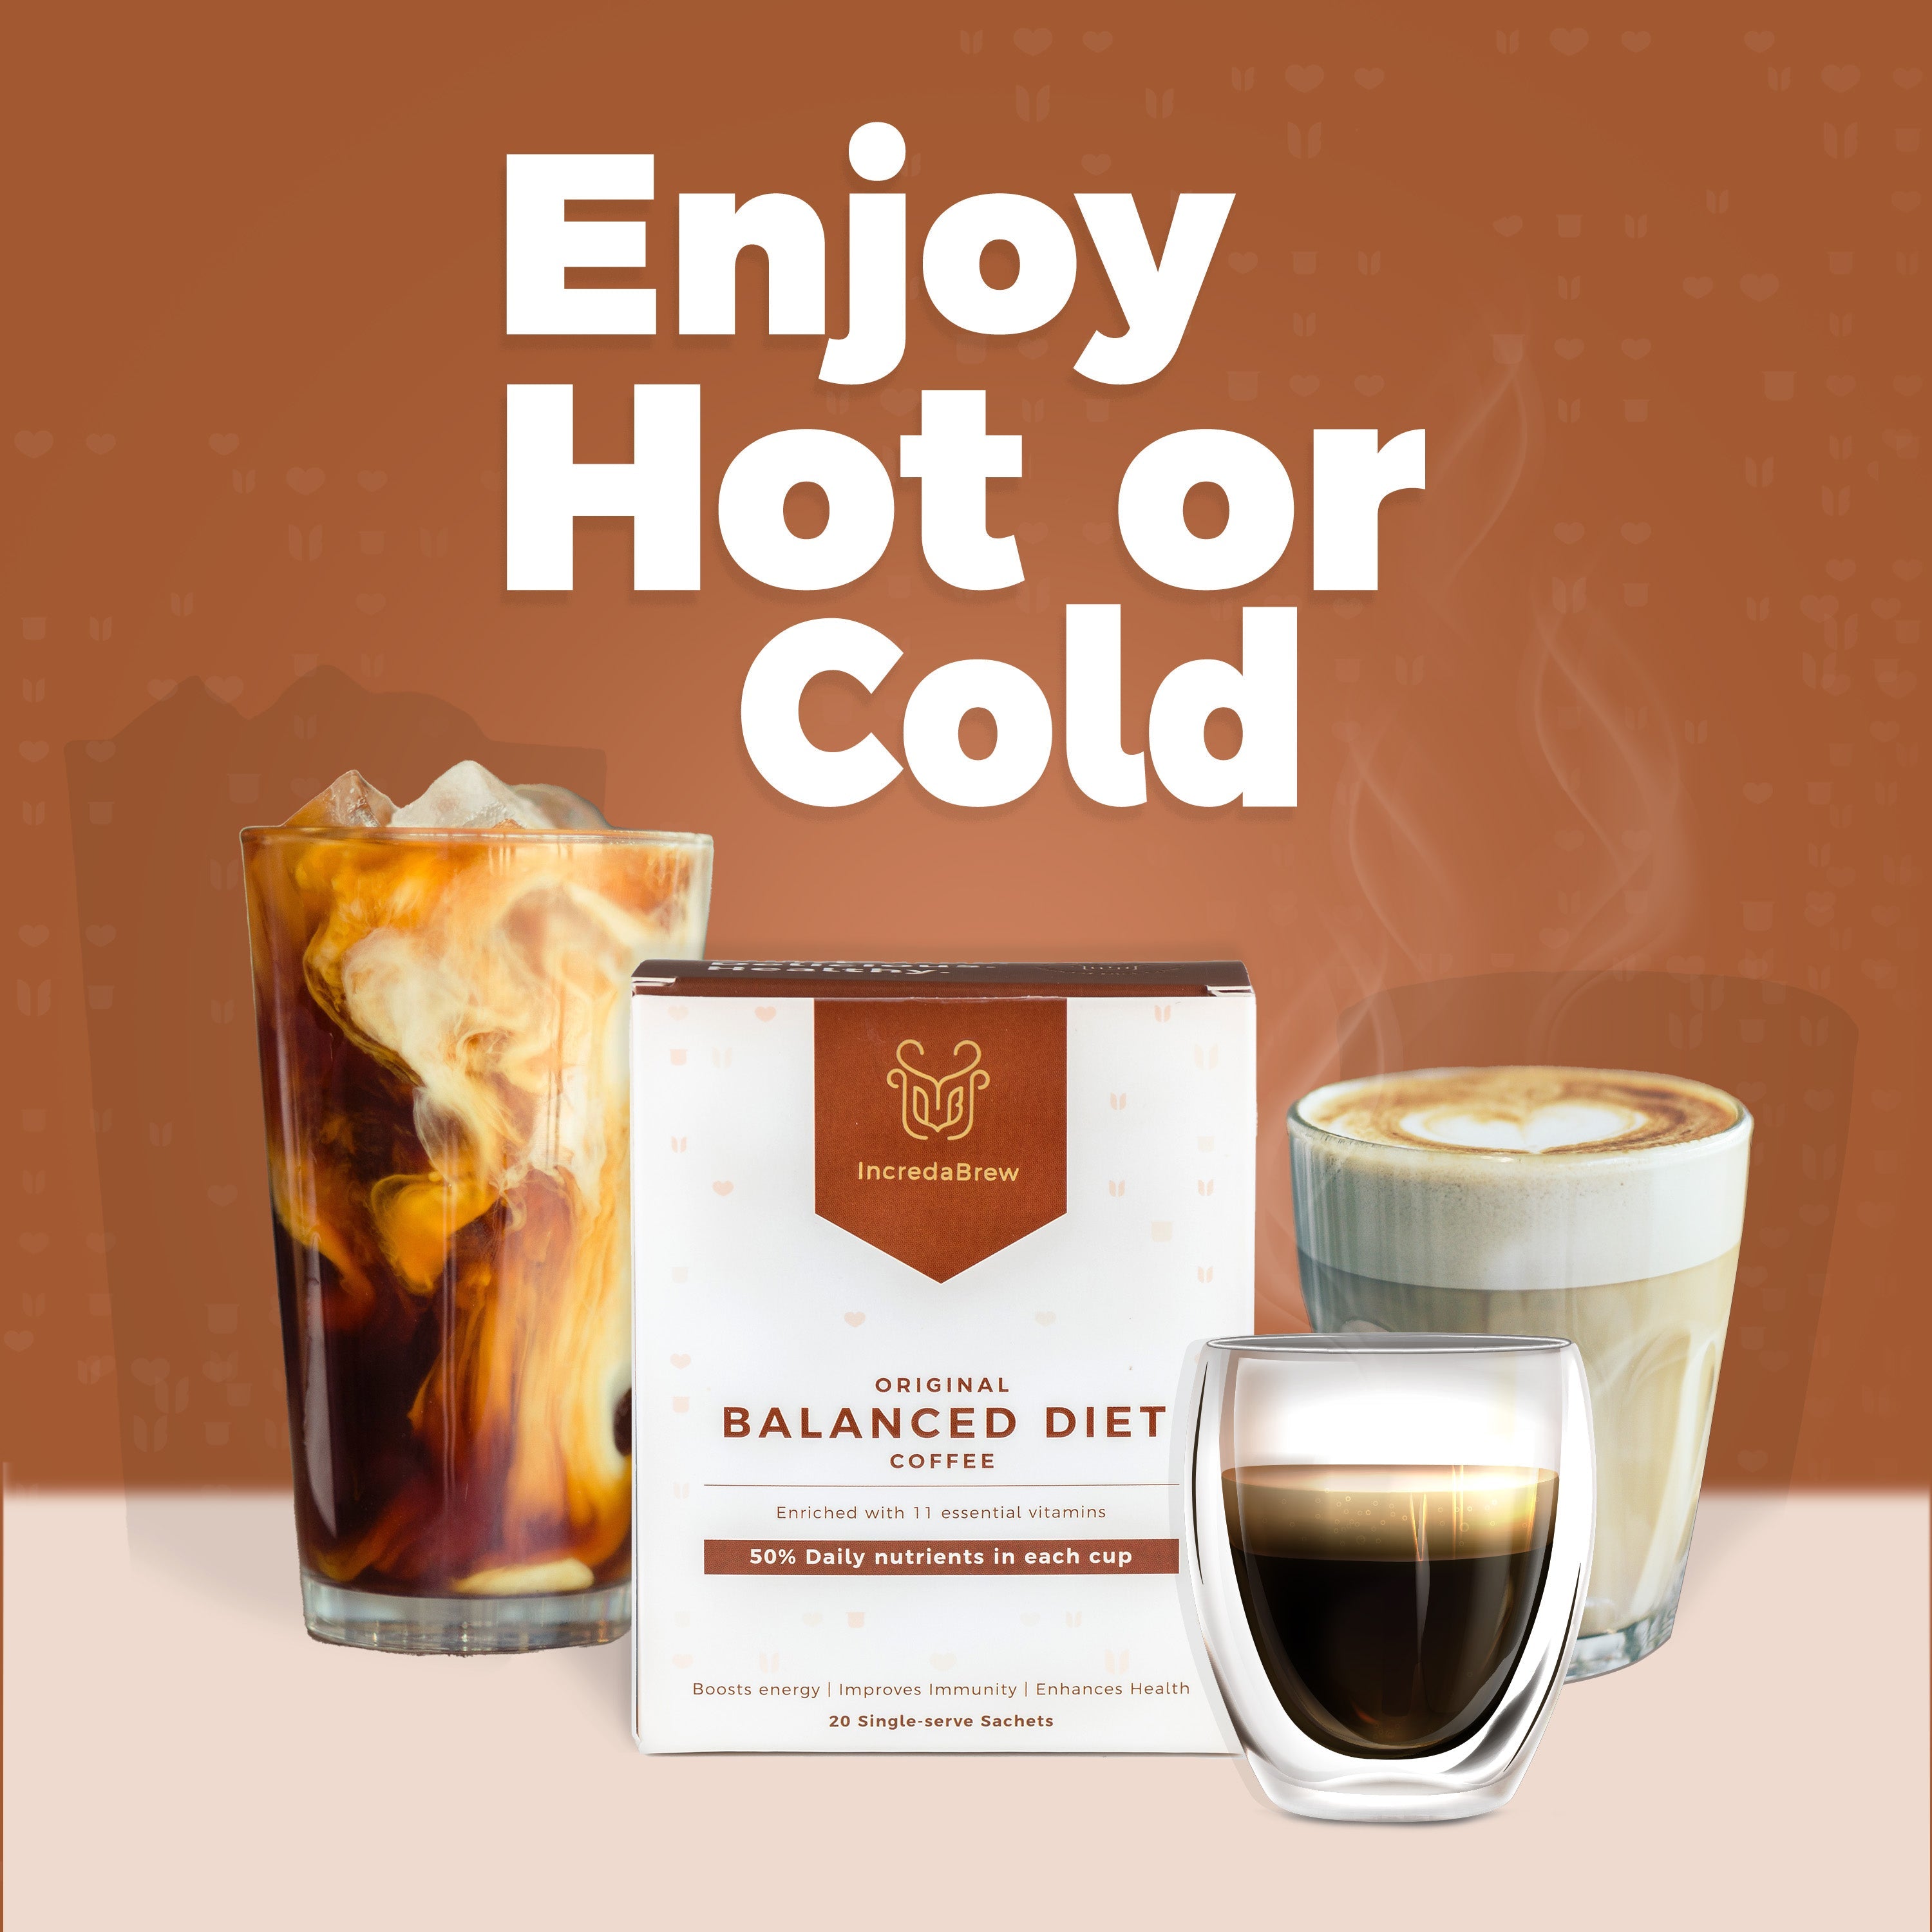 Enjoy Instant Coffee Hot or Cold